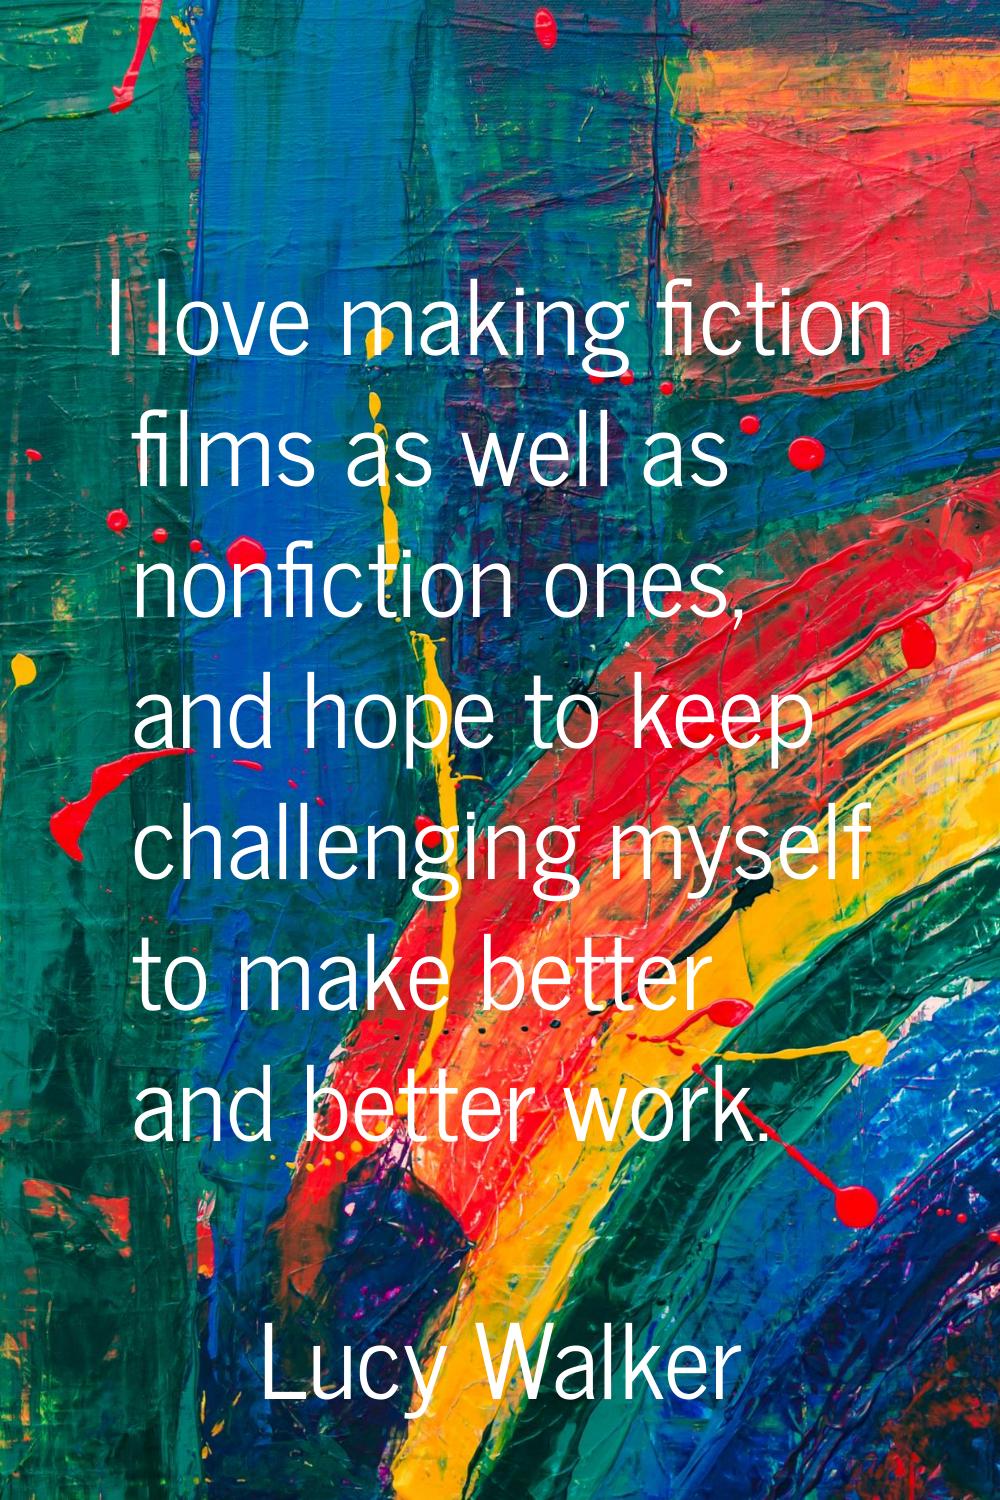 I love making fiction films as well as nonfiction ones, and hope to keep challenging myself to make